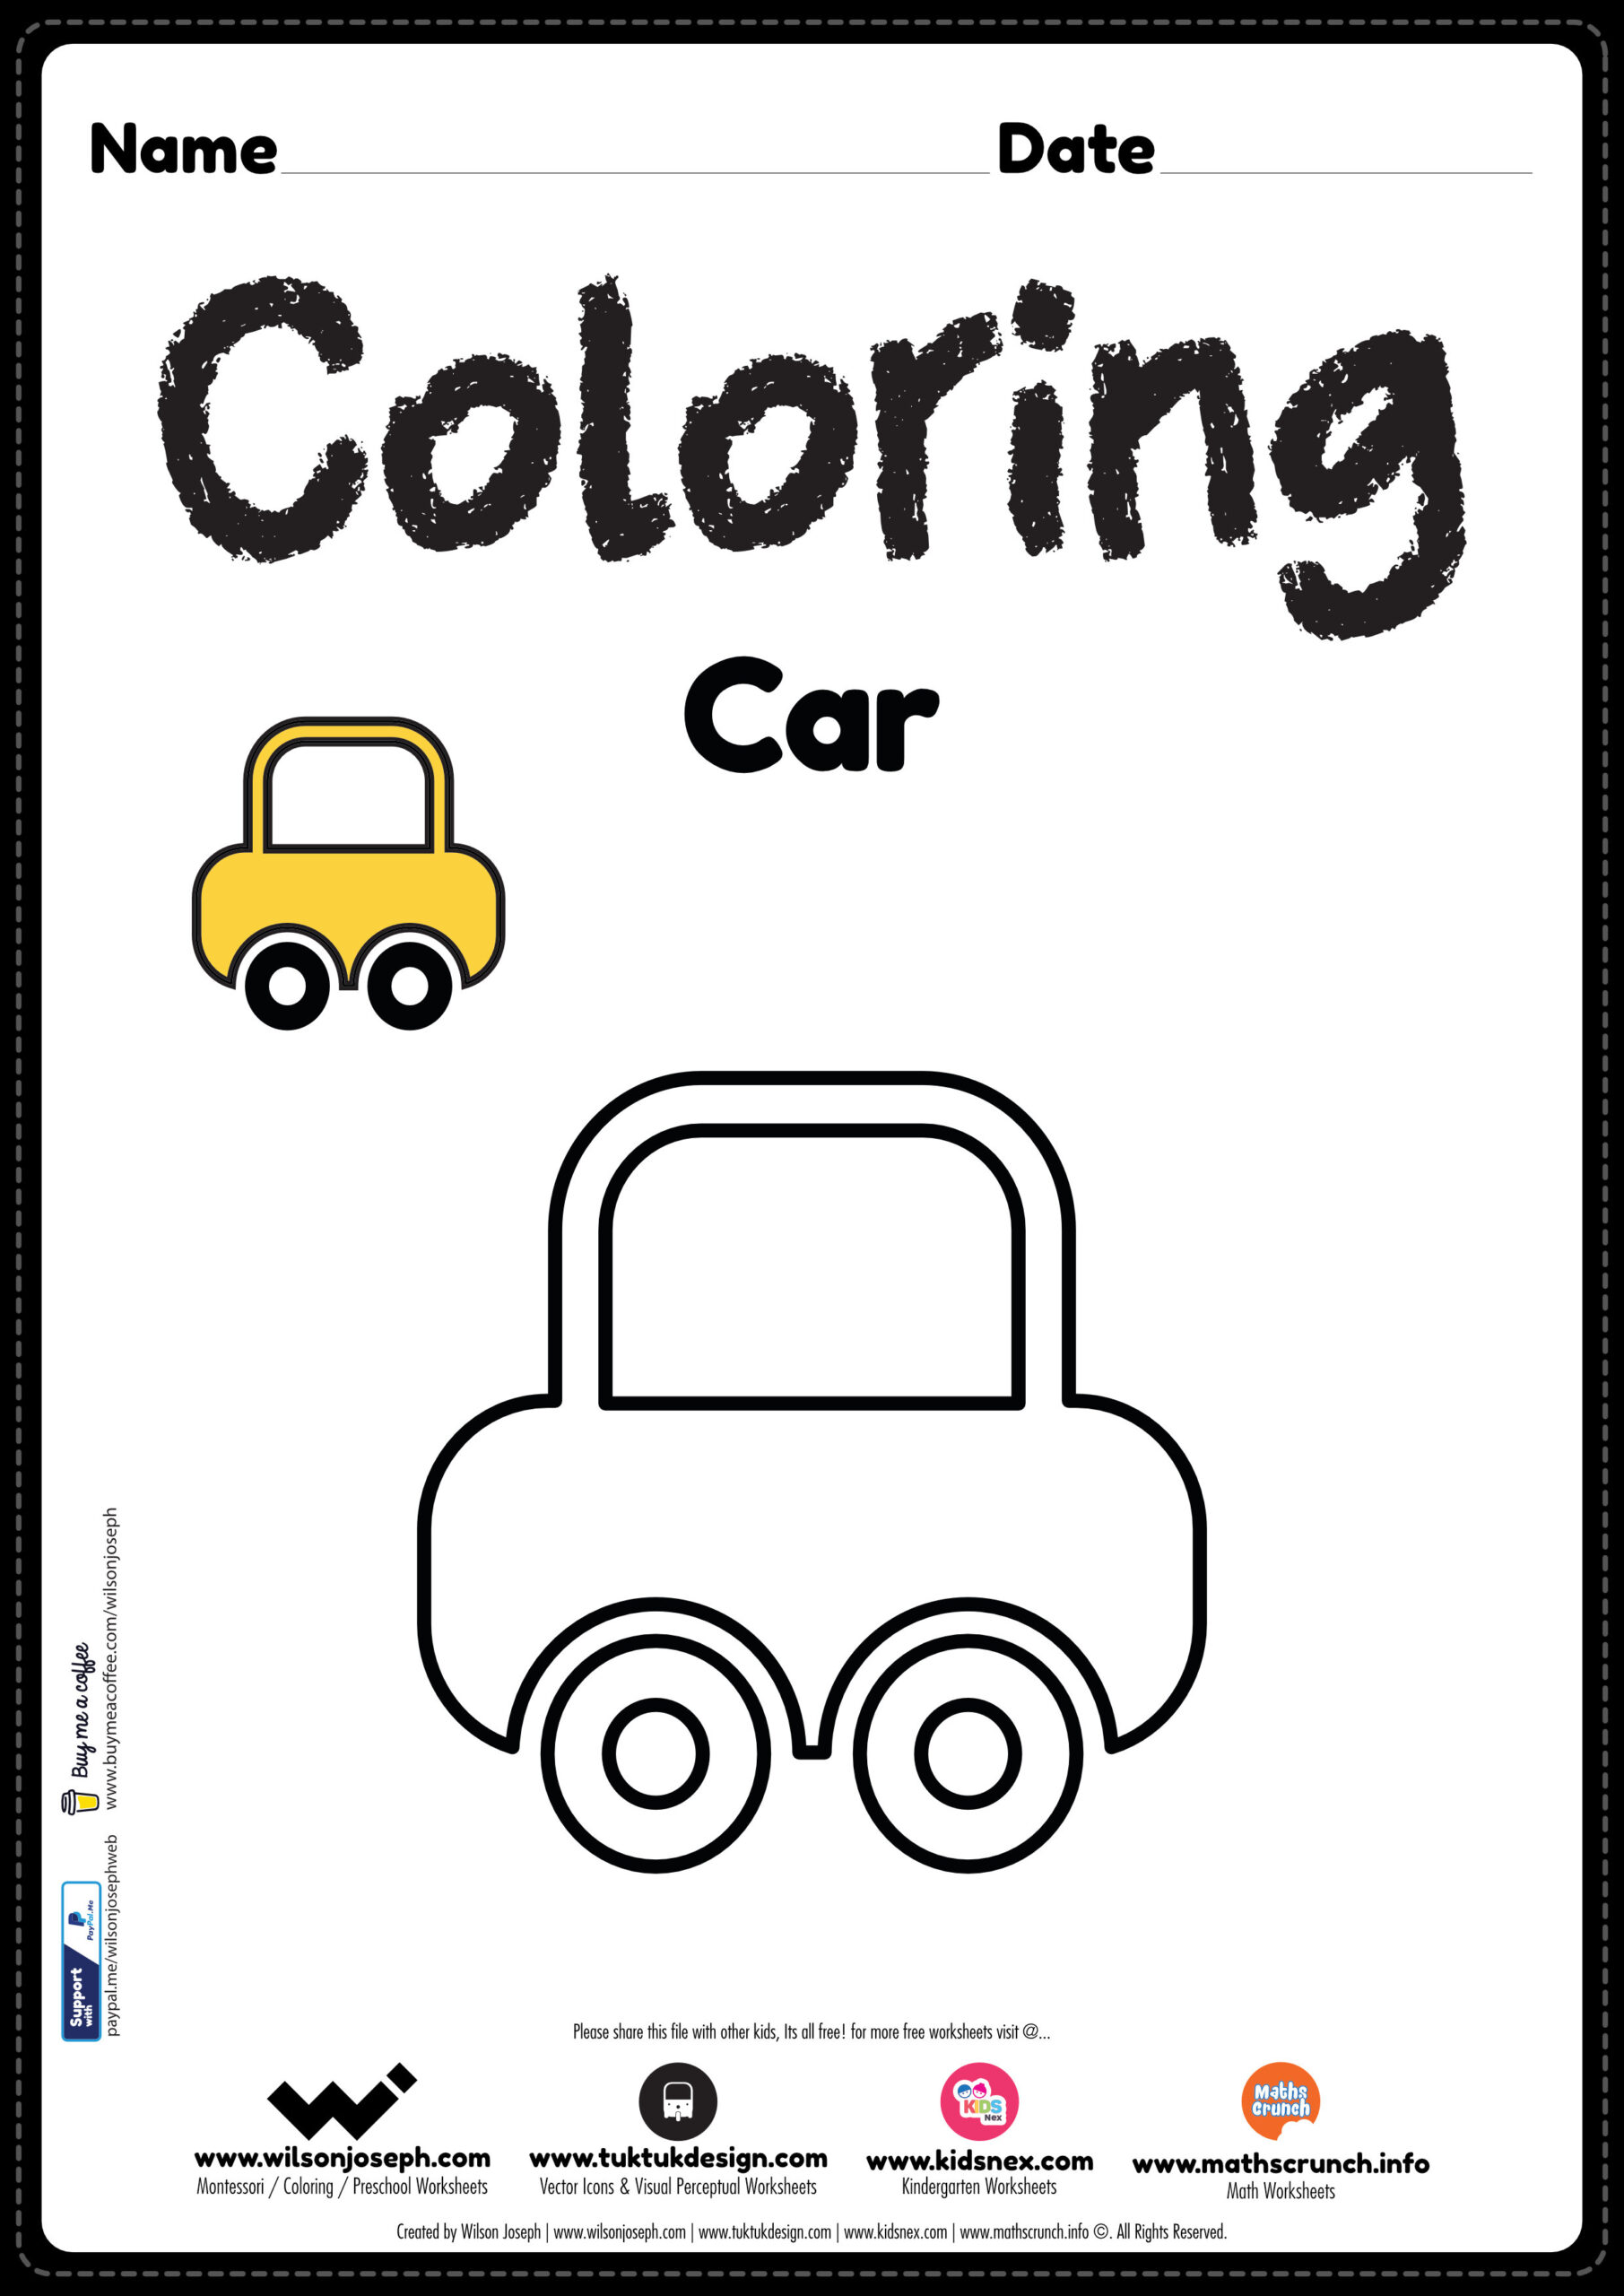 https://www.wilsonjoseph.com/wp-content/uploads/2022/03/03-Car-Coloring-Page-scaled.jpg